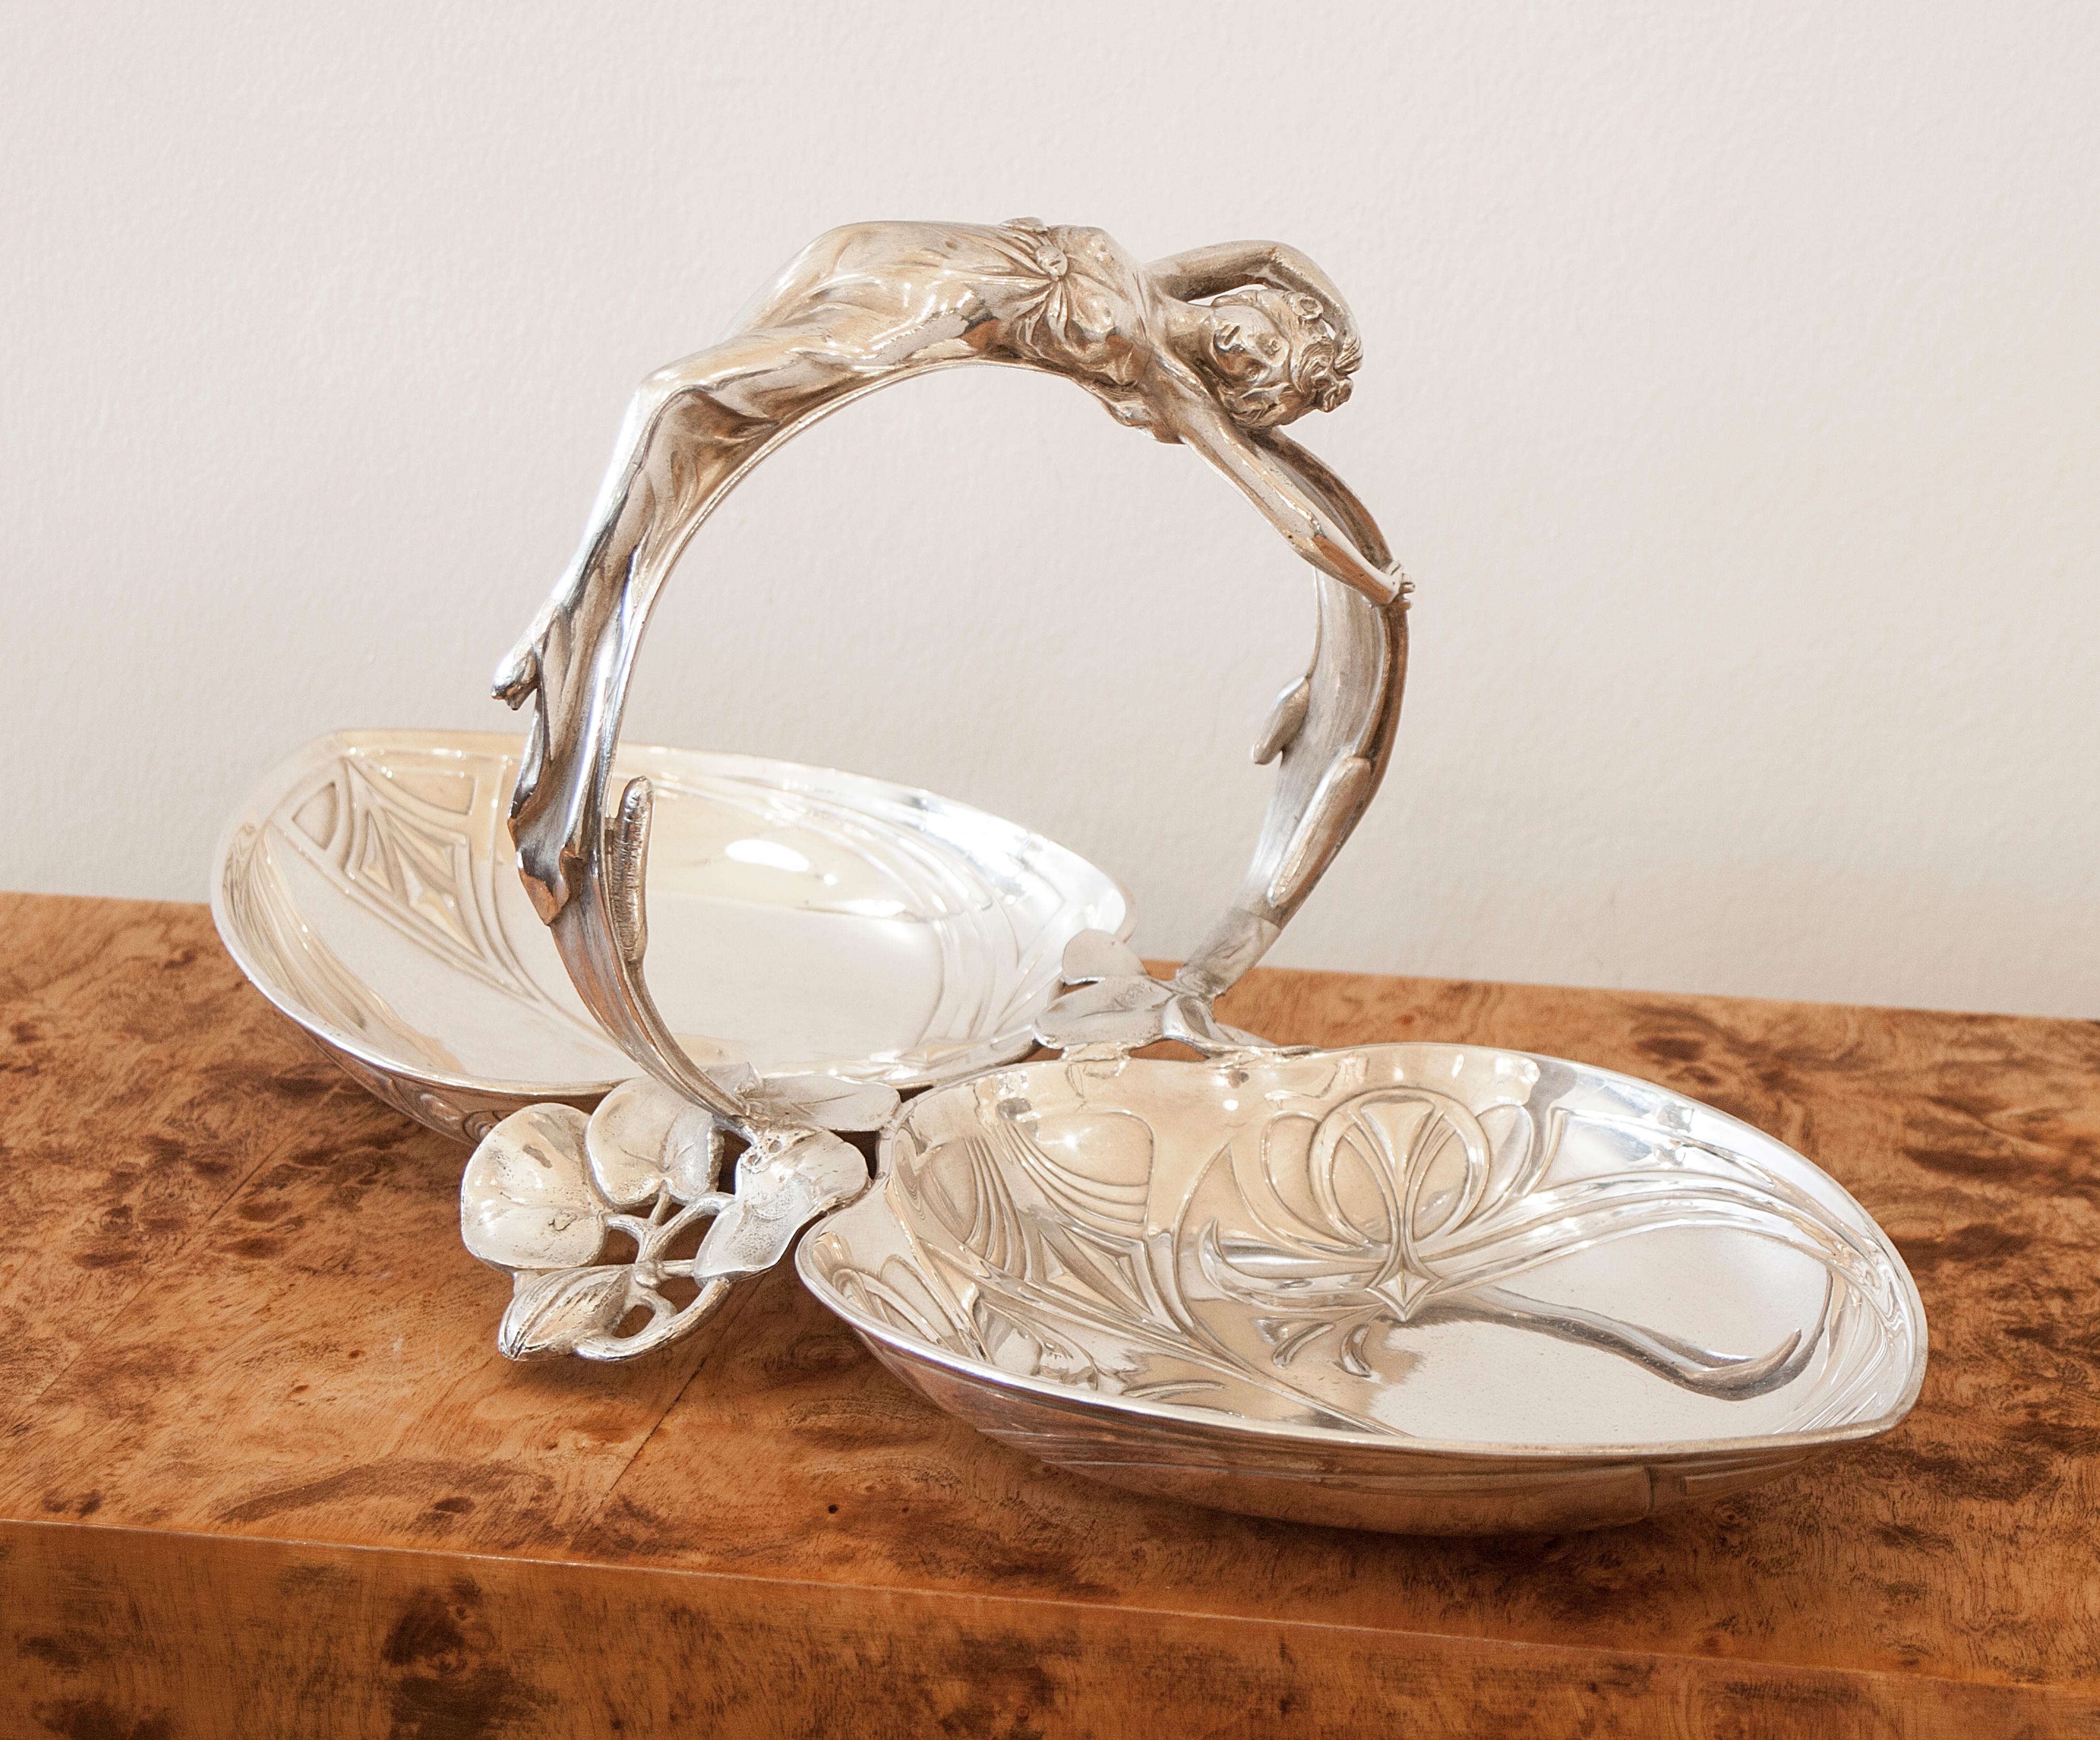 Early 20th Century Double Fruit or Sweet Dish, German, Jugendstil, Art Nouveau, Liberty, 1900, WMF For Sale